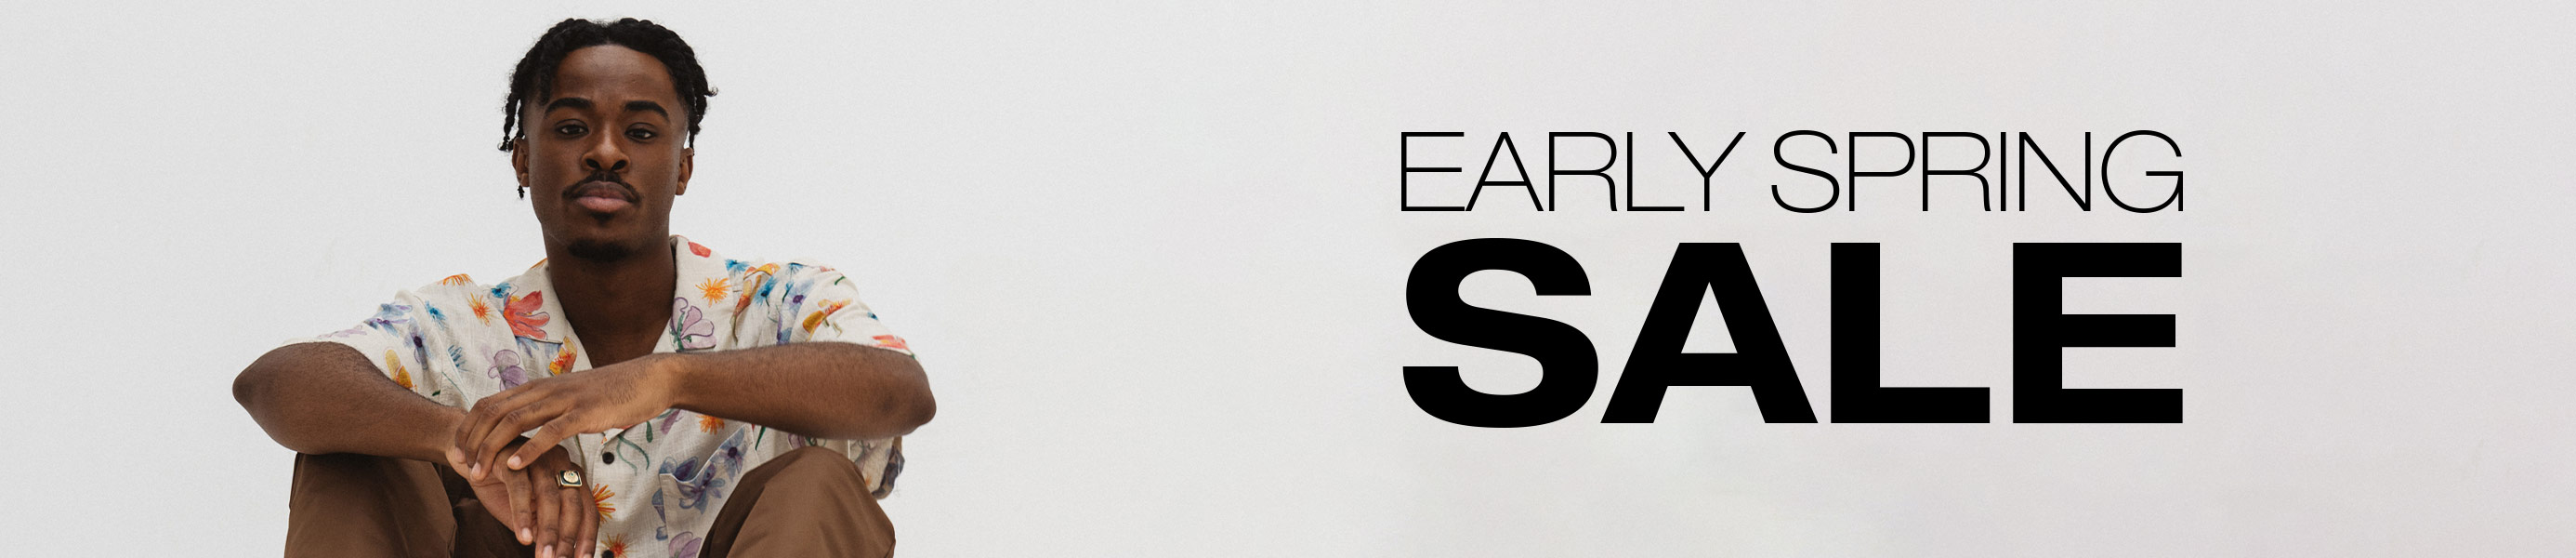 Early Spring Sale Header